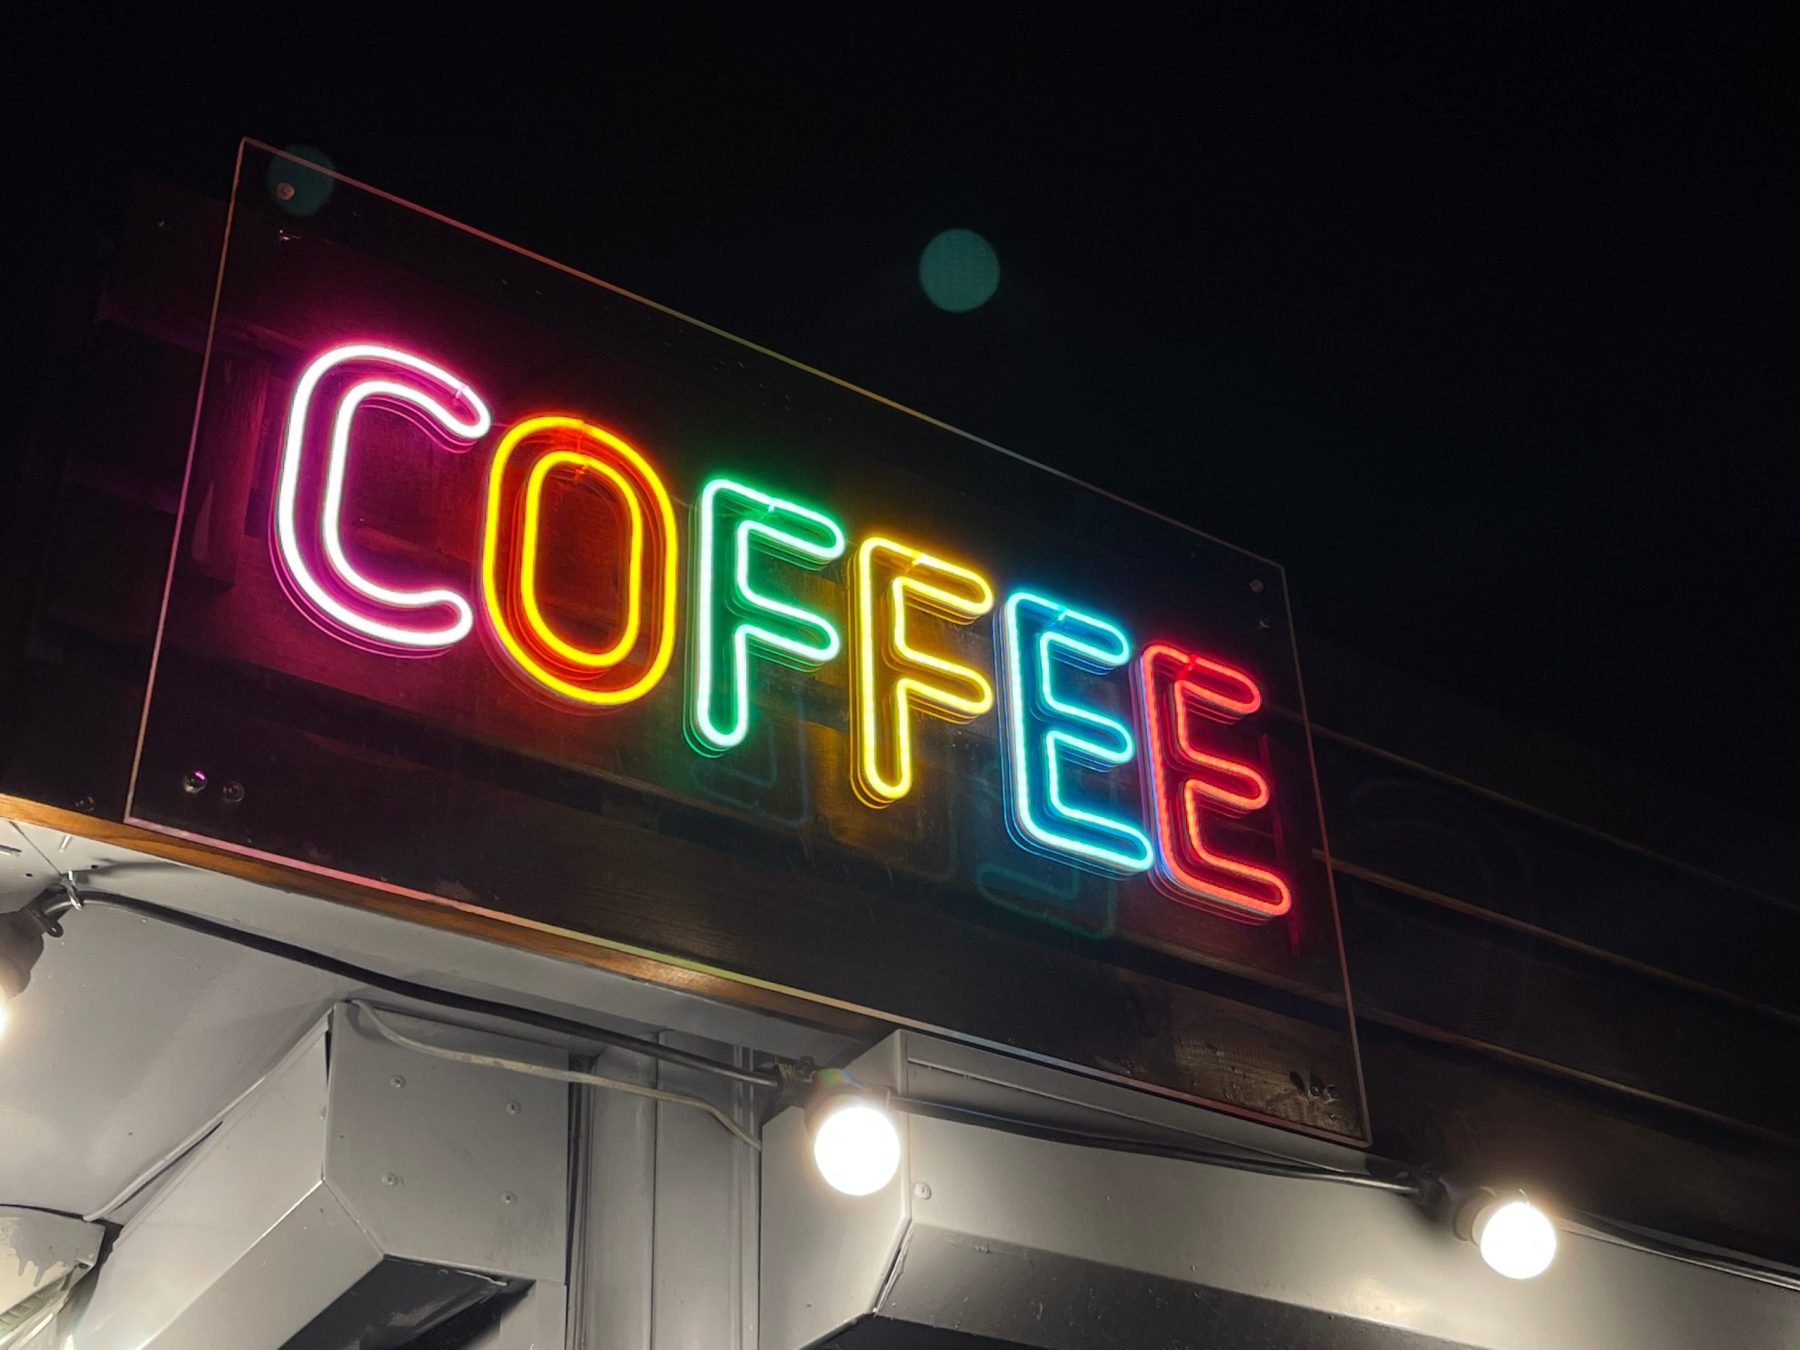 Low angle shot of a colorful coffee shop neon sign in the dark